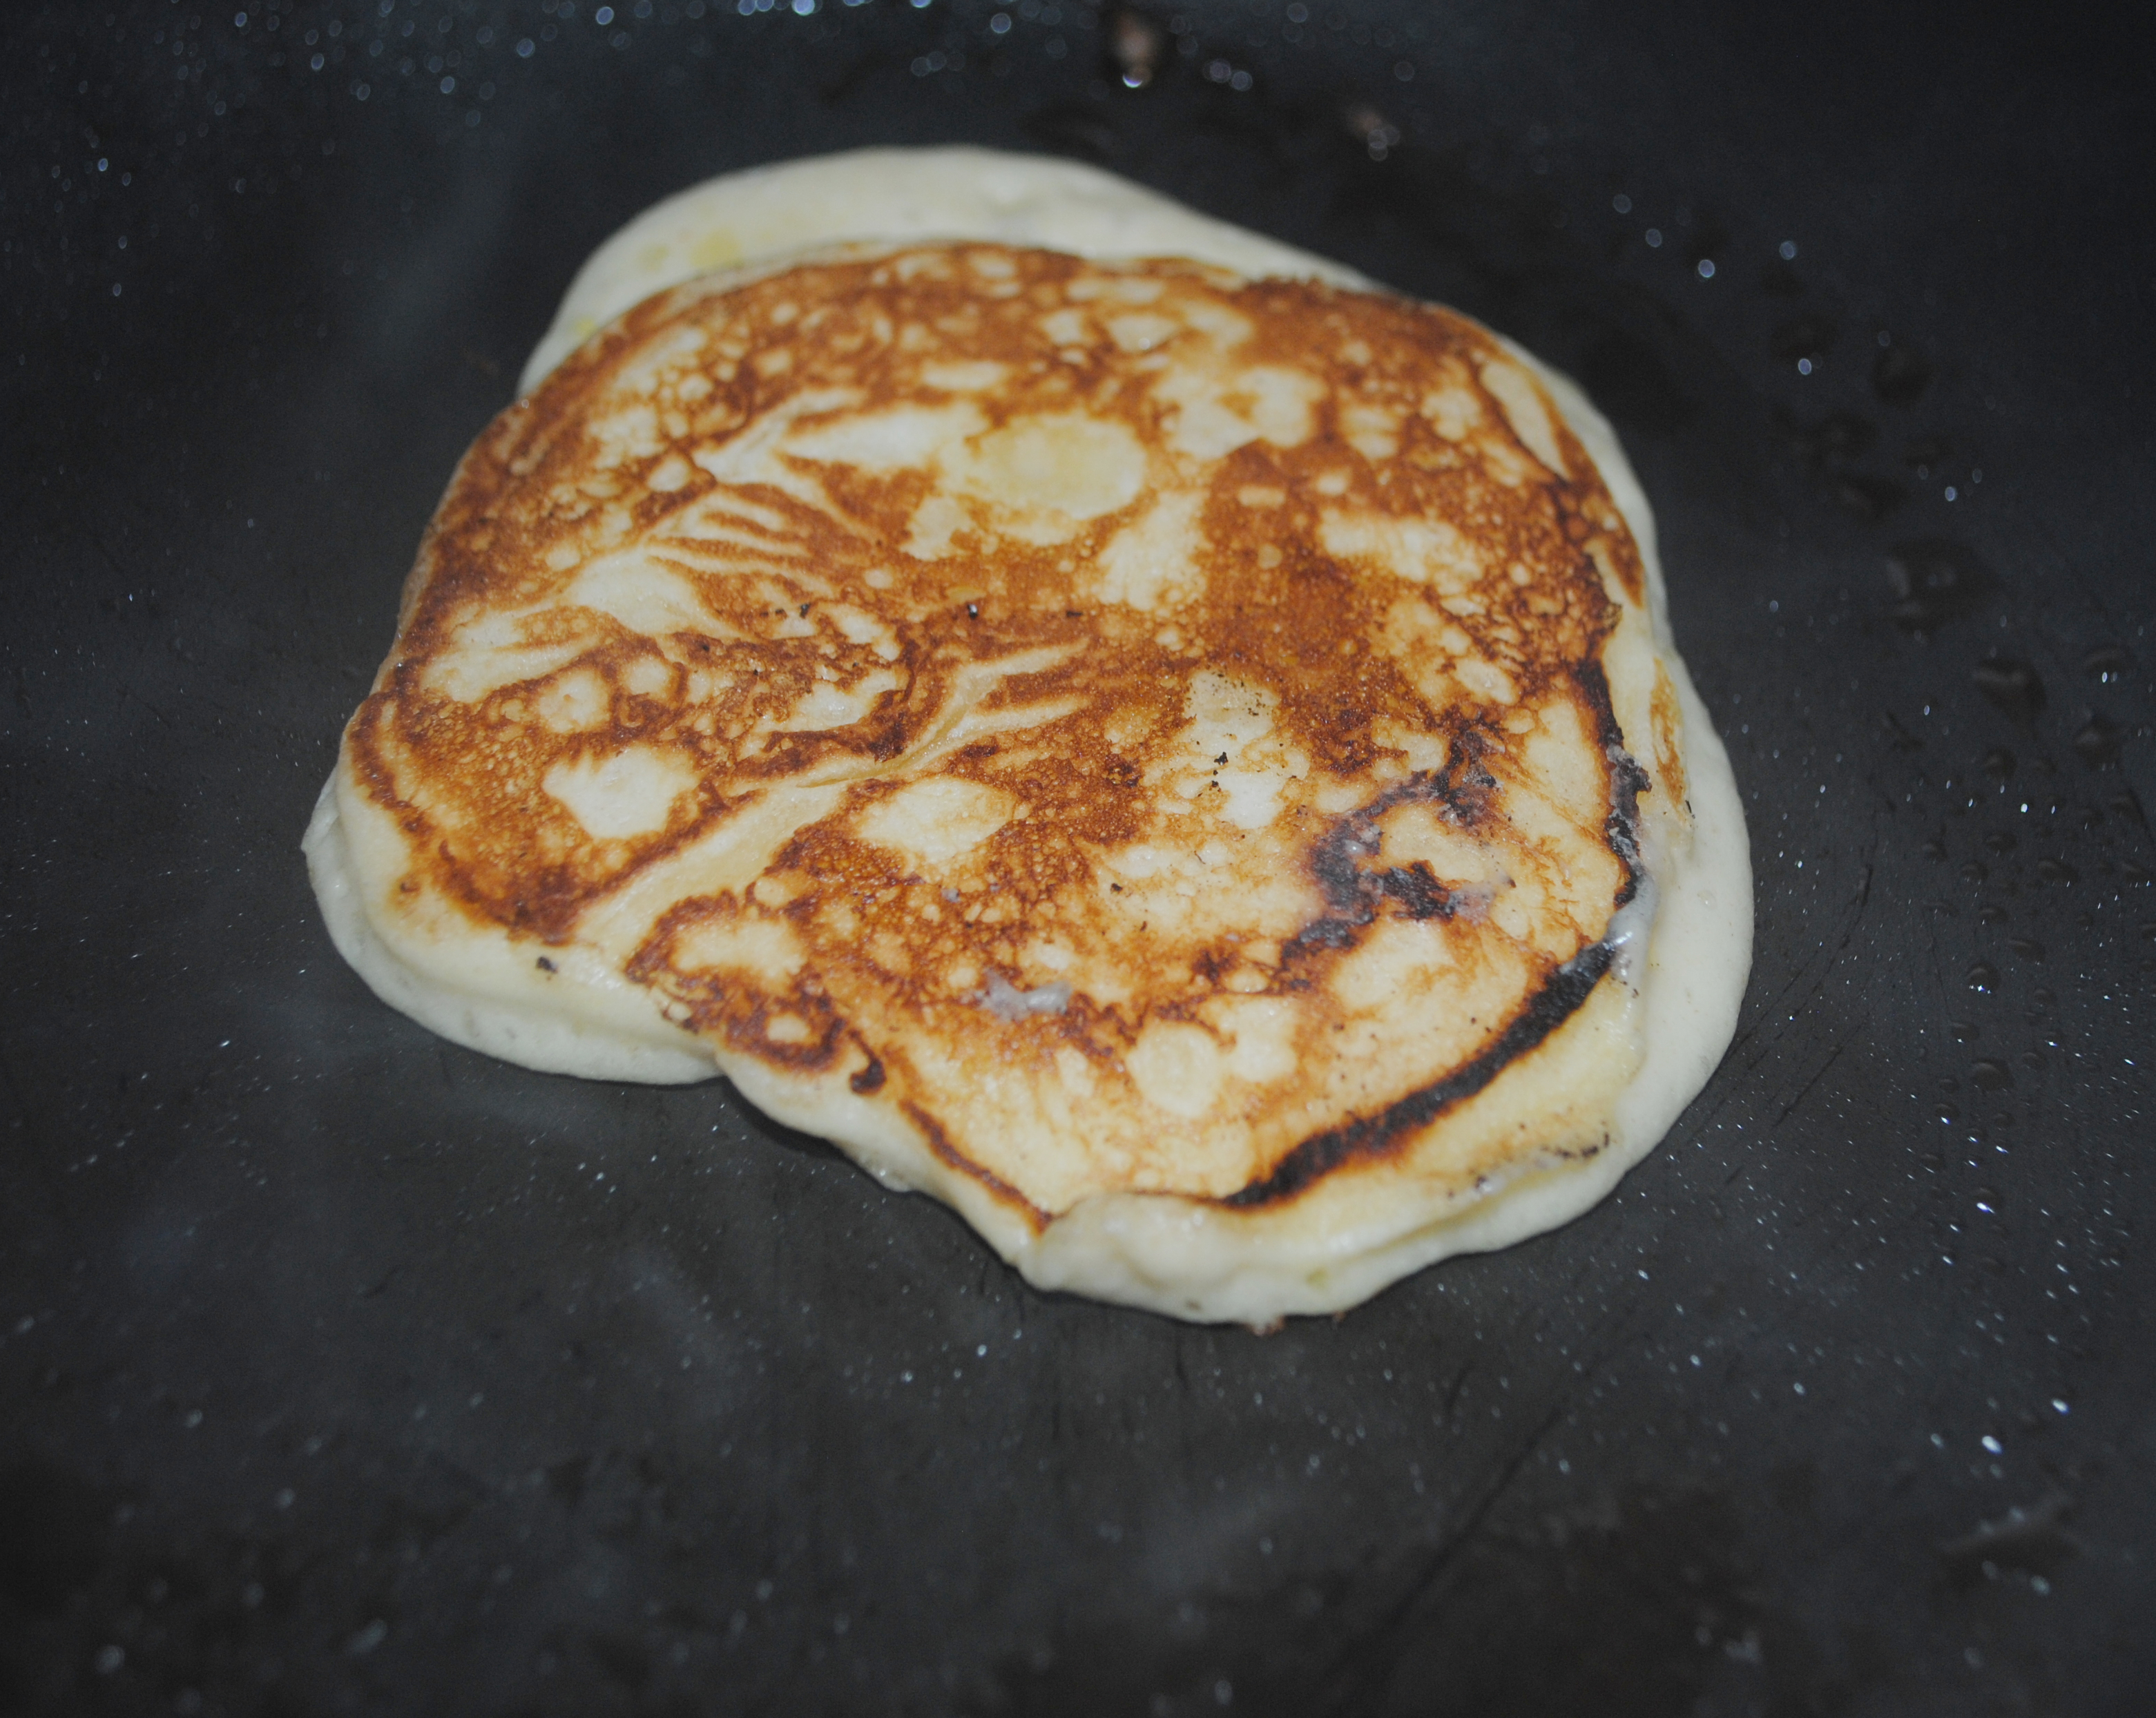 make syrup Impress homemade #homemade thick American to  pancake to #southernstyle how Pancakes  Chef